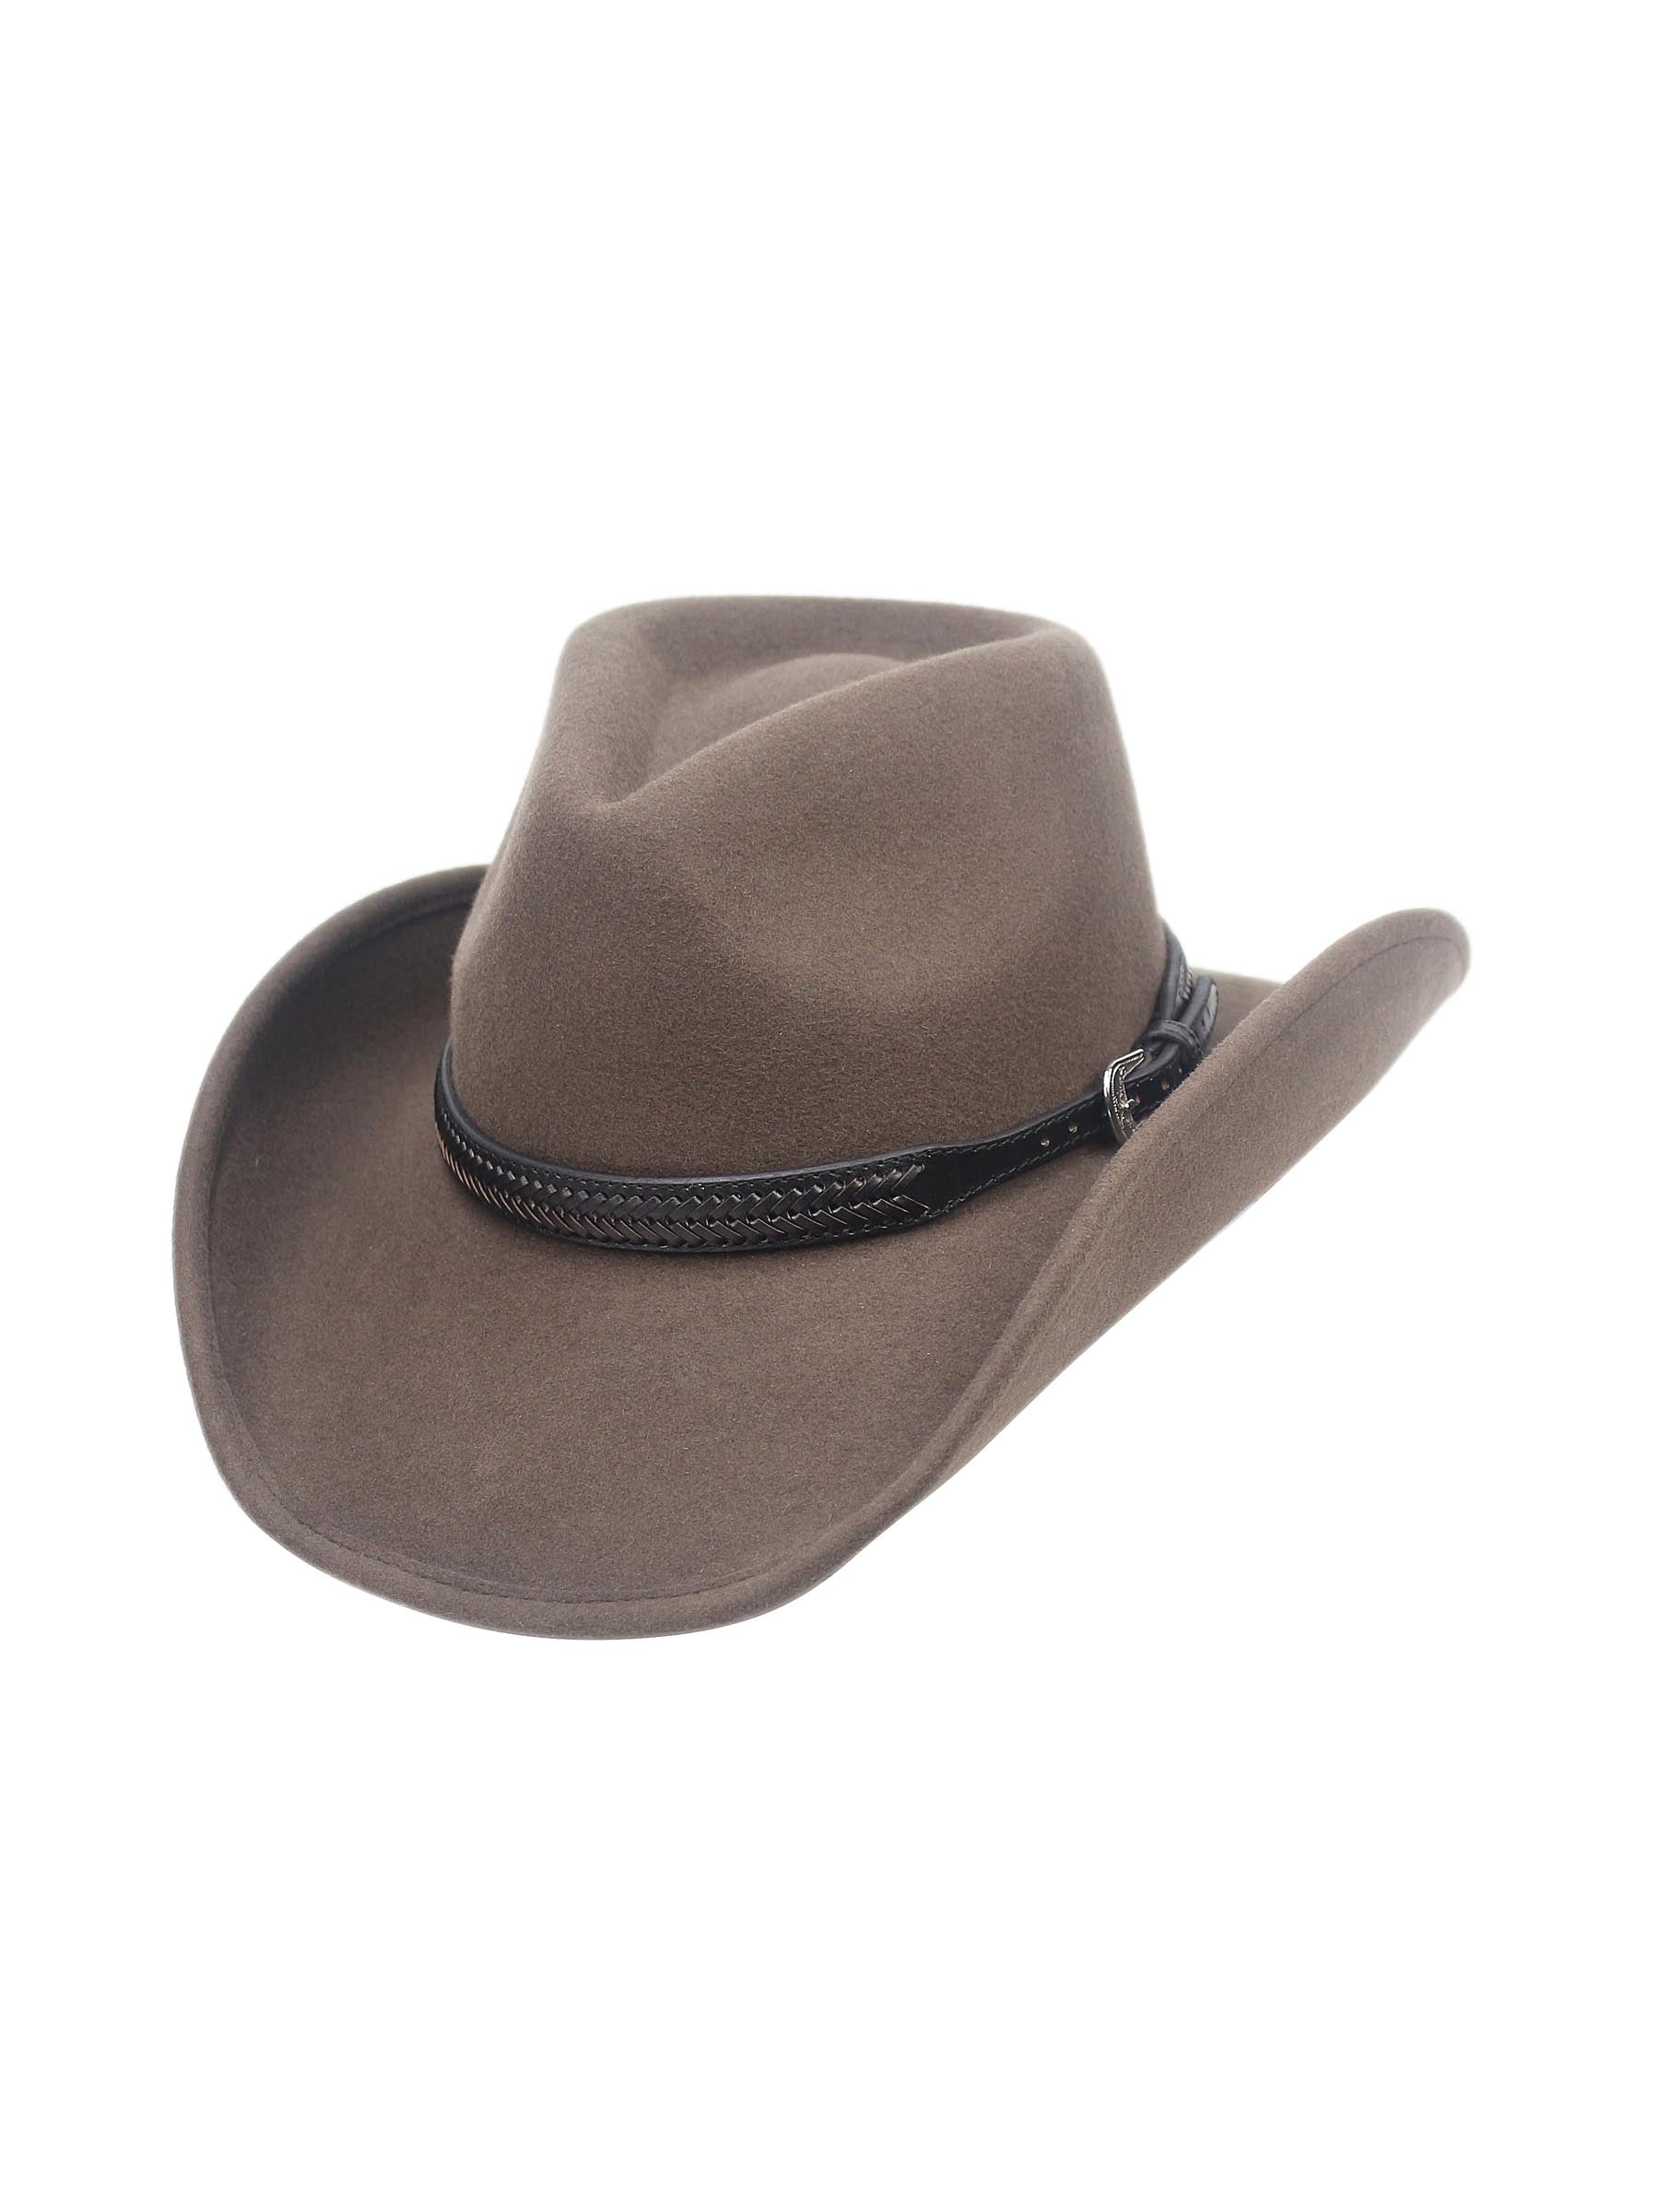 Western Hat Band for Cowboy Hats by Silver Canyon, Brown Leather with Brown Lacing